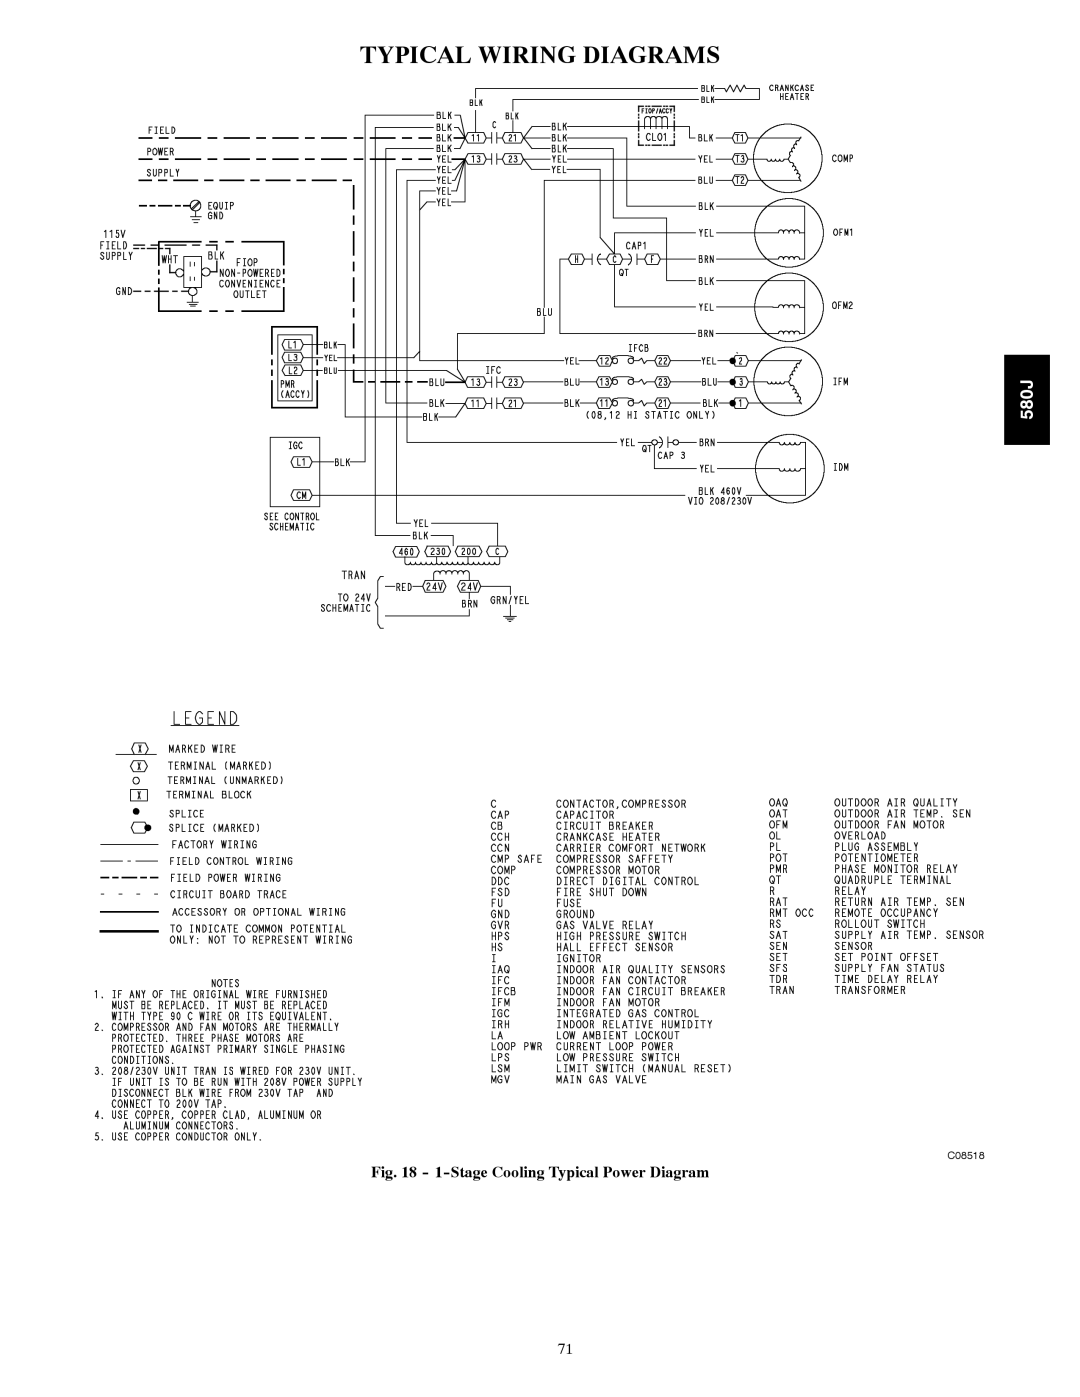 Bryant 580J manual Typical Wiring Diagrams, 1-StageCooling Typical Power Diagram, C08518 